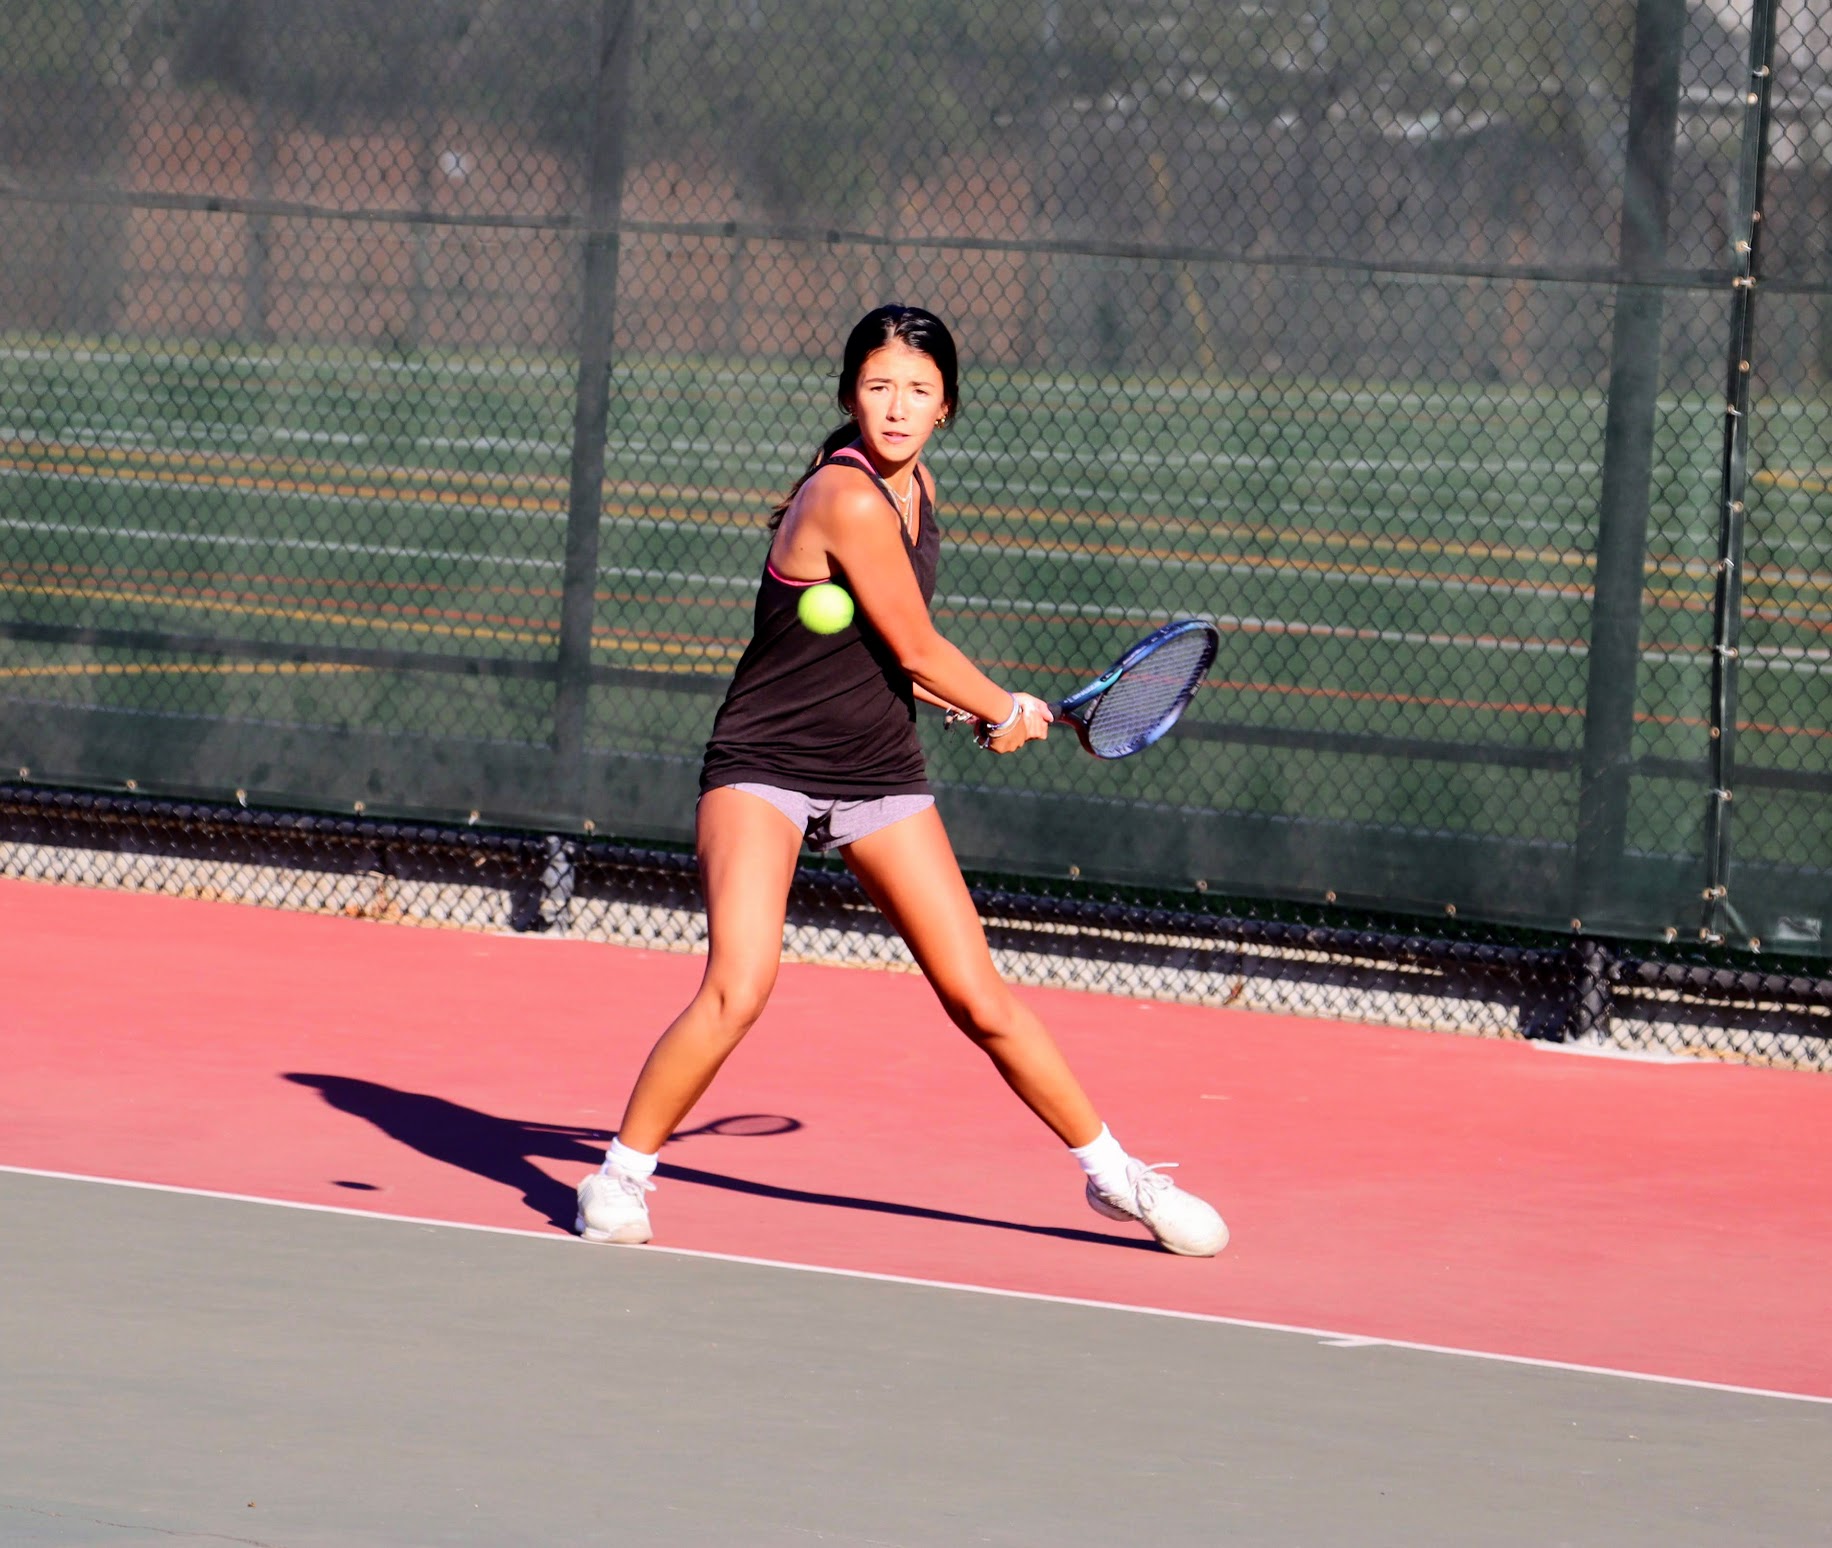 Junior Natalie Gyde hits a backhand during a singles match at the girls’ tennis practice on Thursday, Aug. 24.